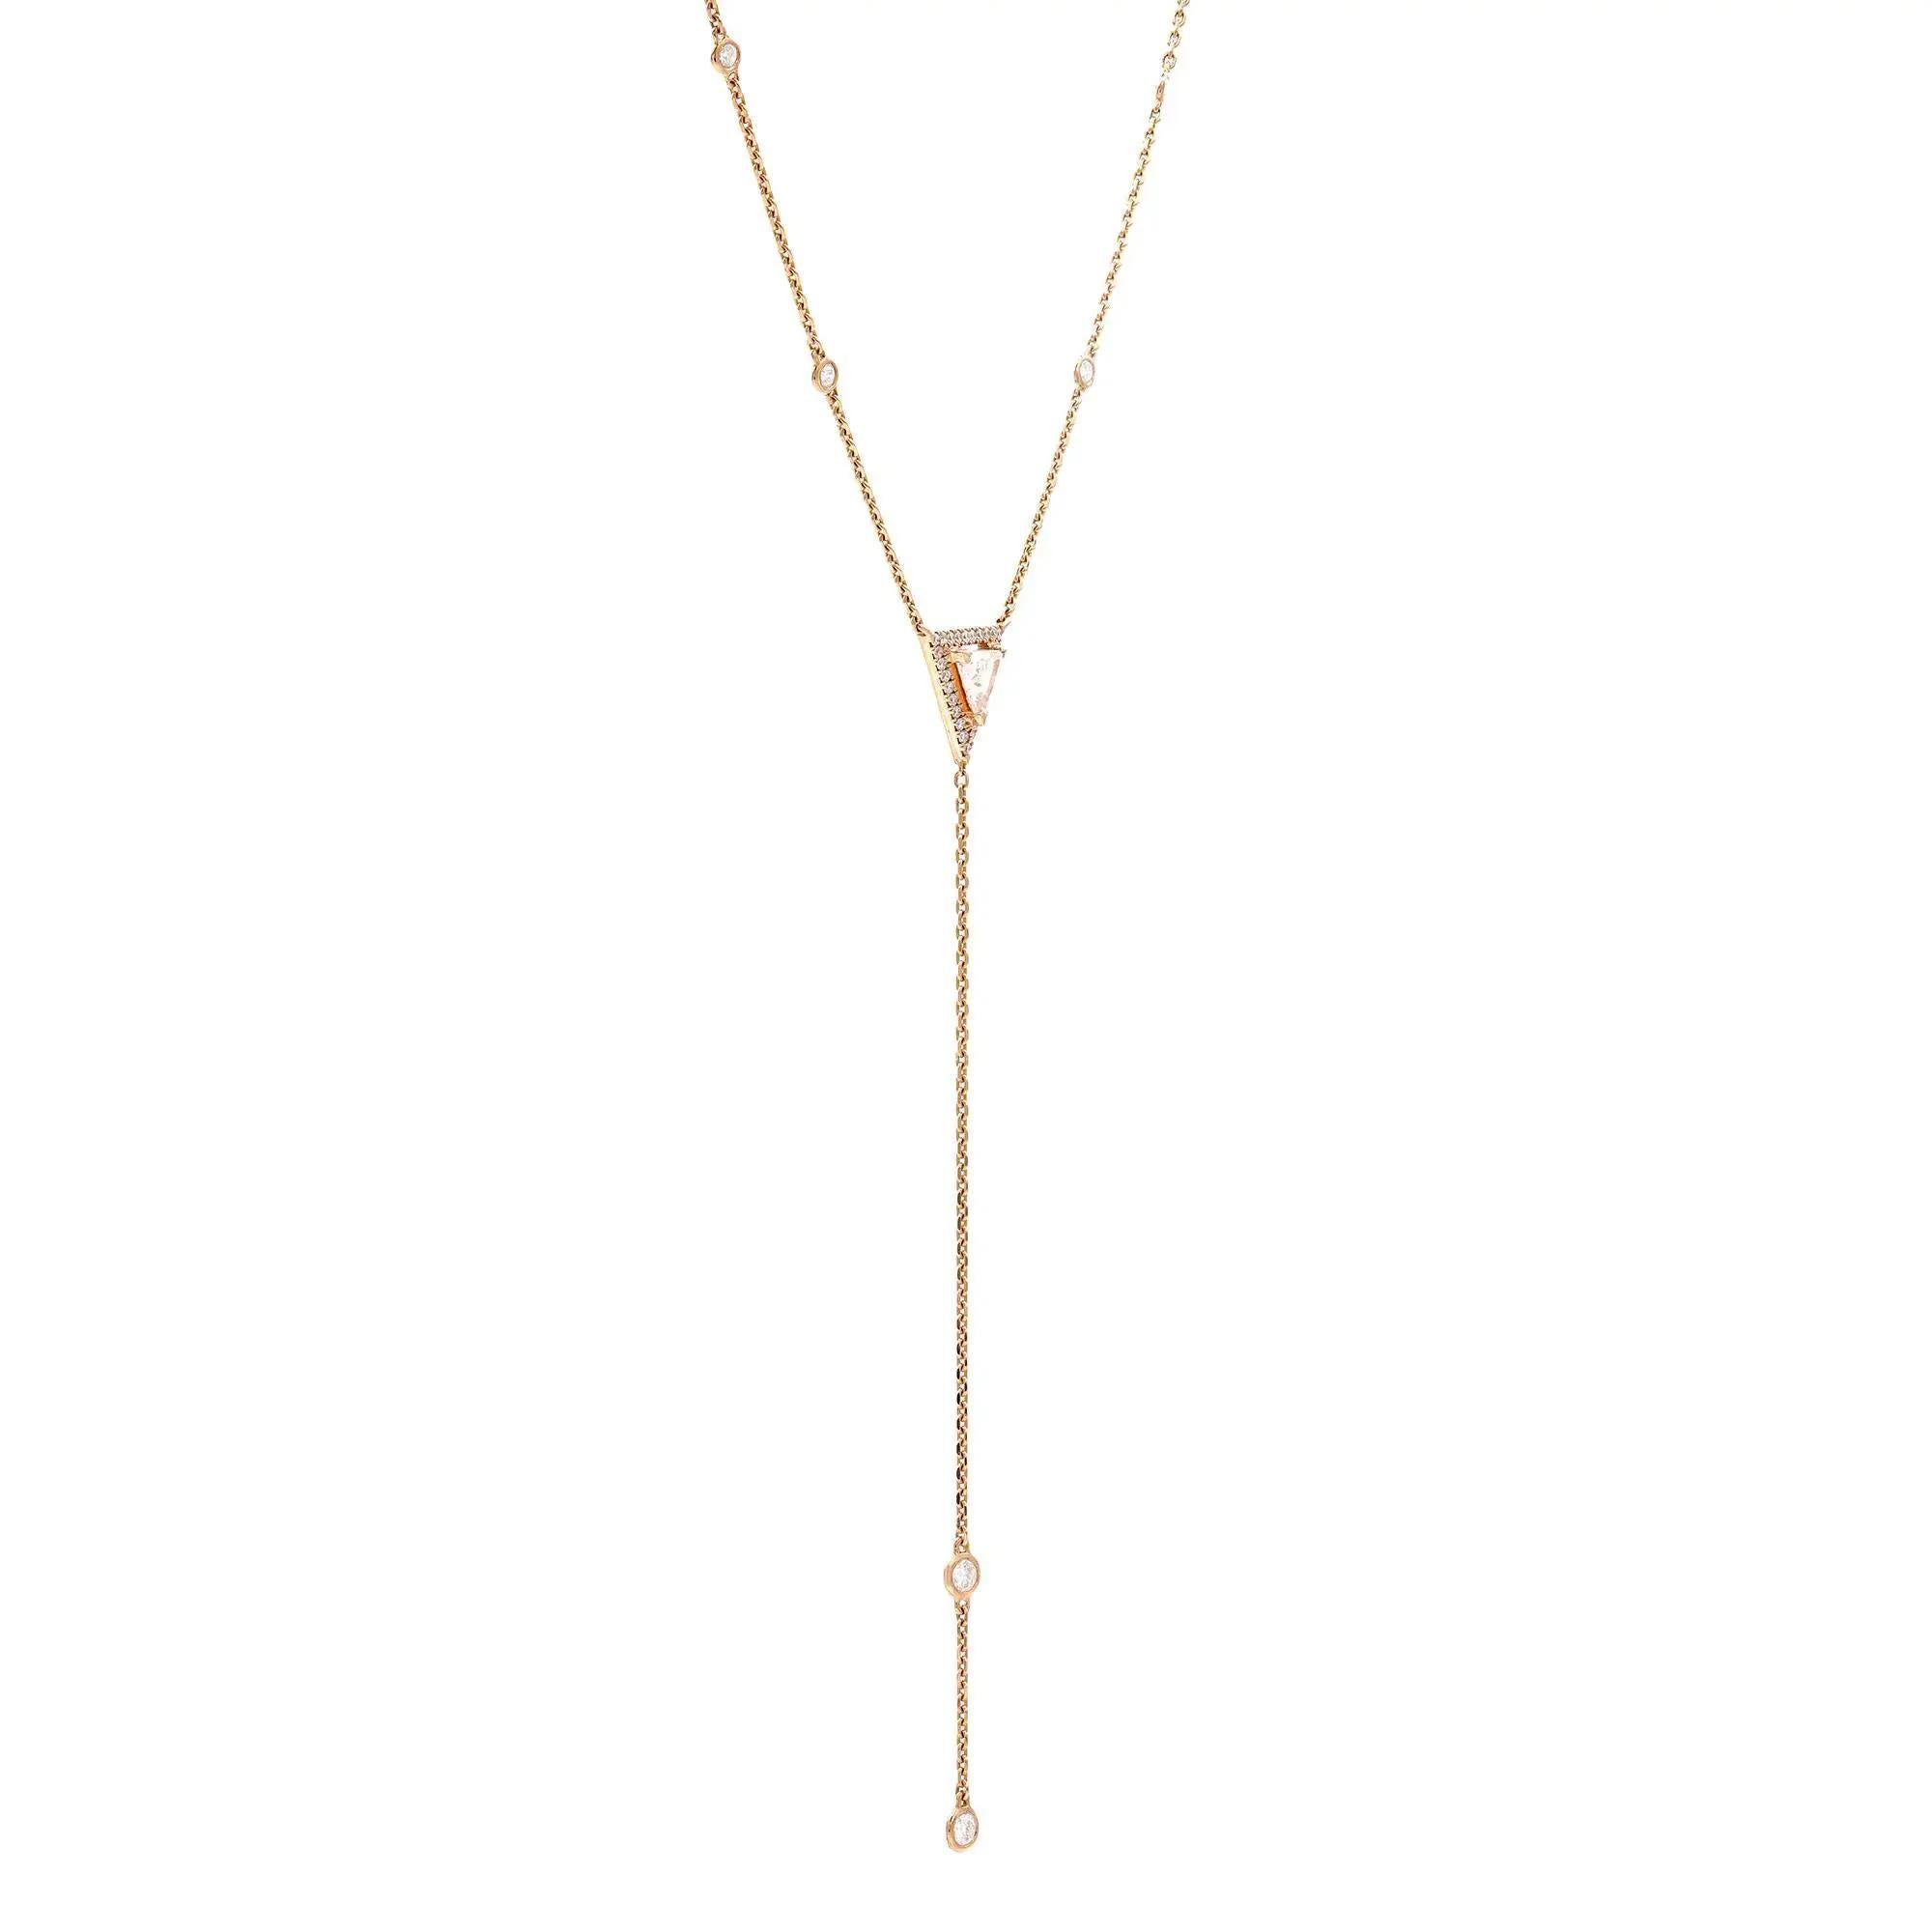 So dainty and pretty, perfect for any occasion. This beautiful Messika Cravate Thea diamond lariat chain necklace is crafted in 18K rose gold. It features a center prong set triangular diamond with a halo of round cut diamonds along with a diamond